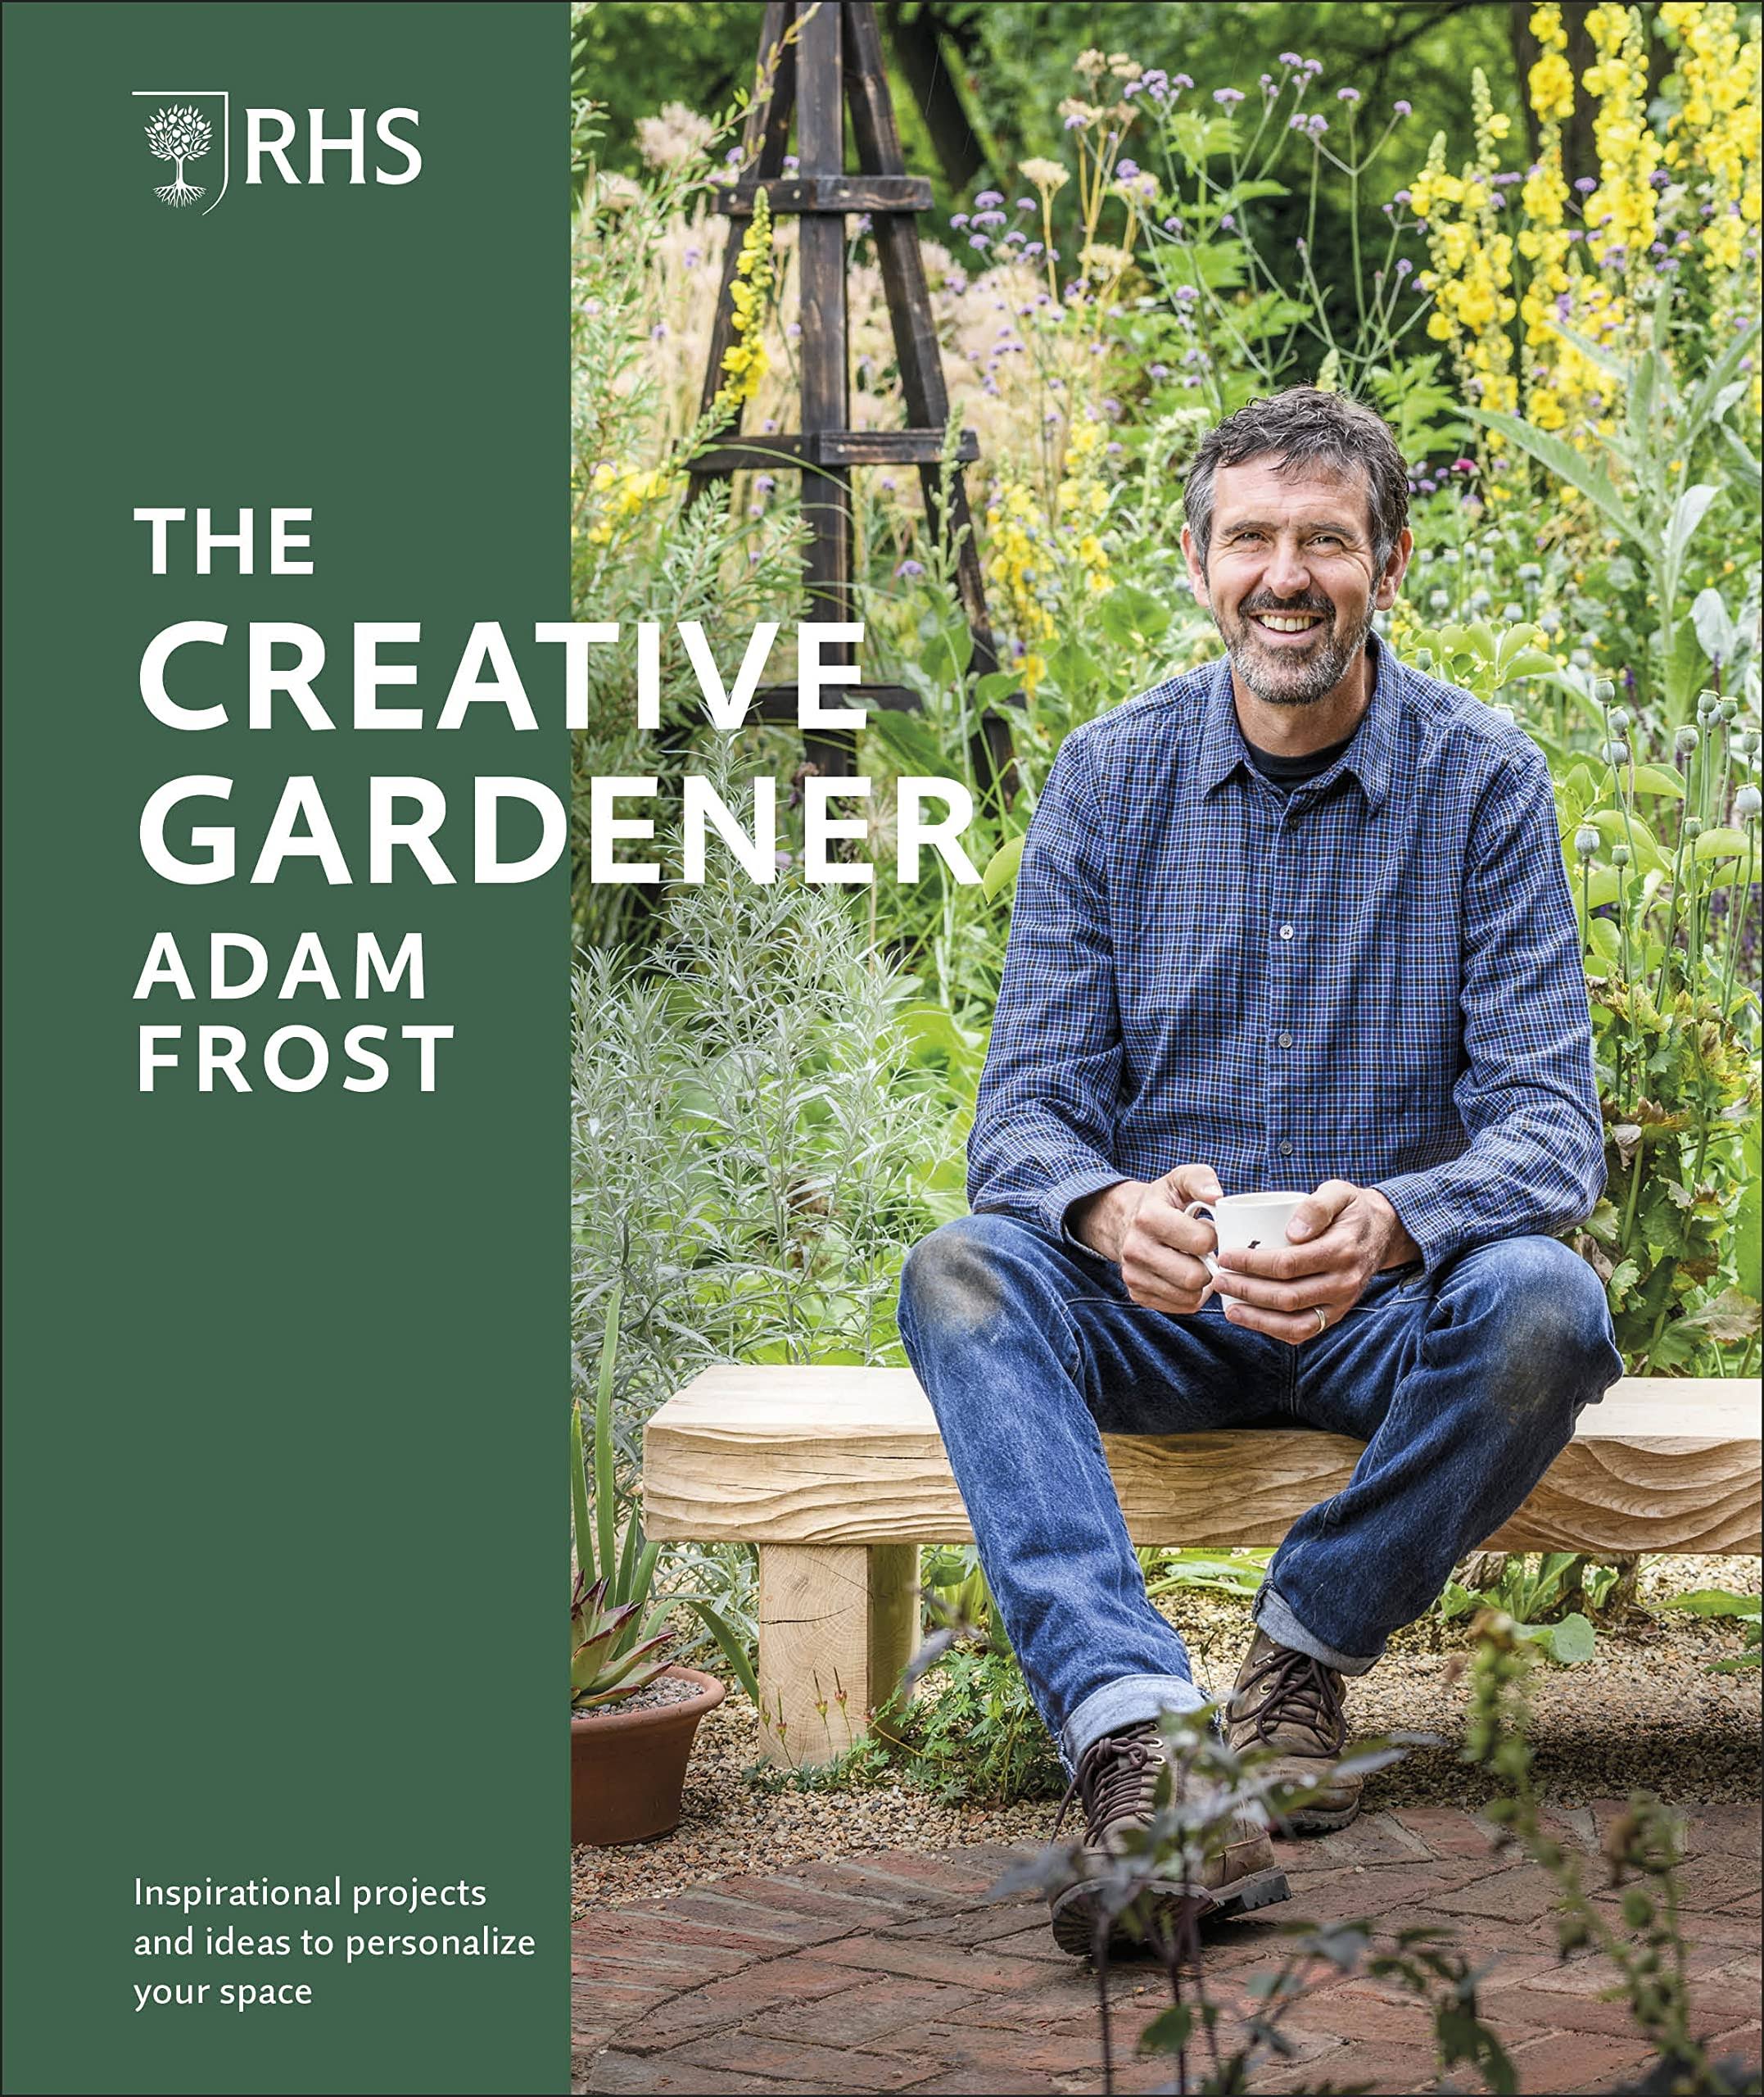 RHS the Creative Gardener: Inspiration and Advice to Create the Space You Want [Book]